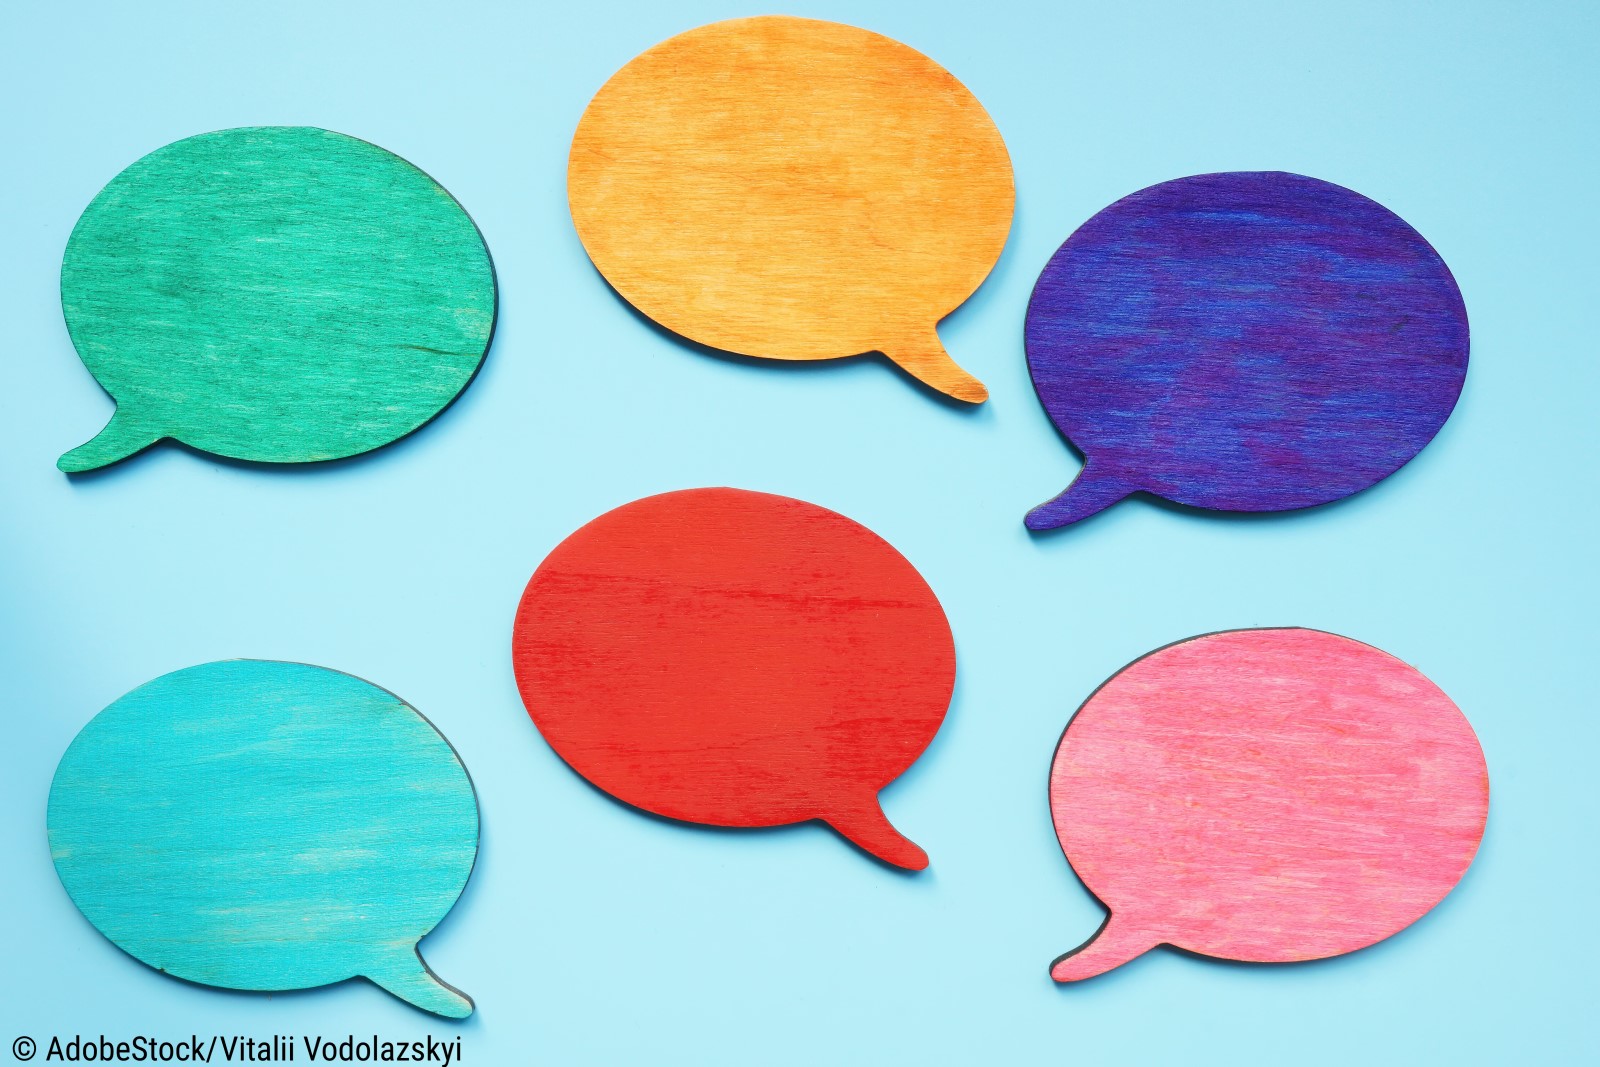 In this image we see 6 brightly colored speech bubbles against a blue background.